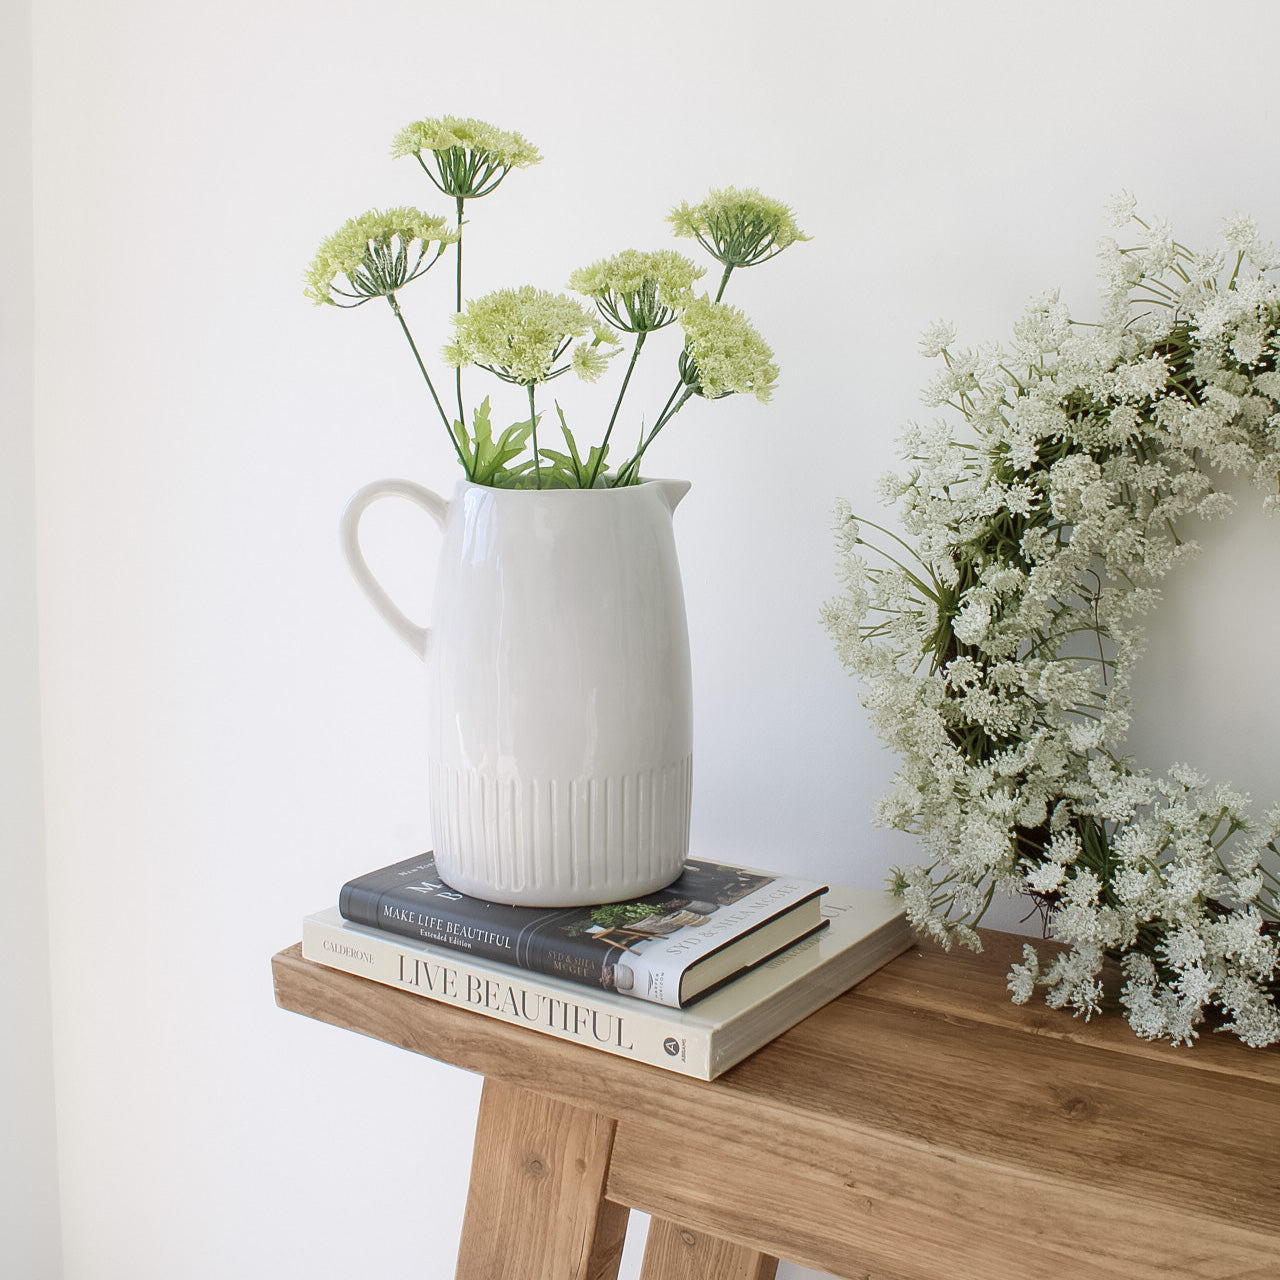 Queen Anne's Lace Spray | Bundle of 3